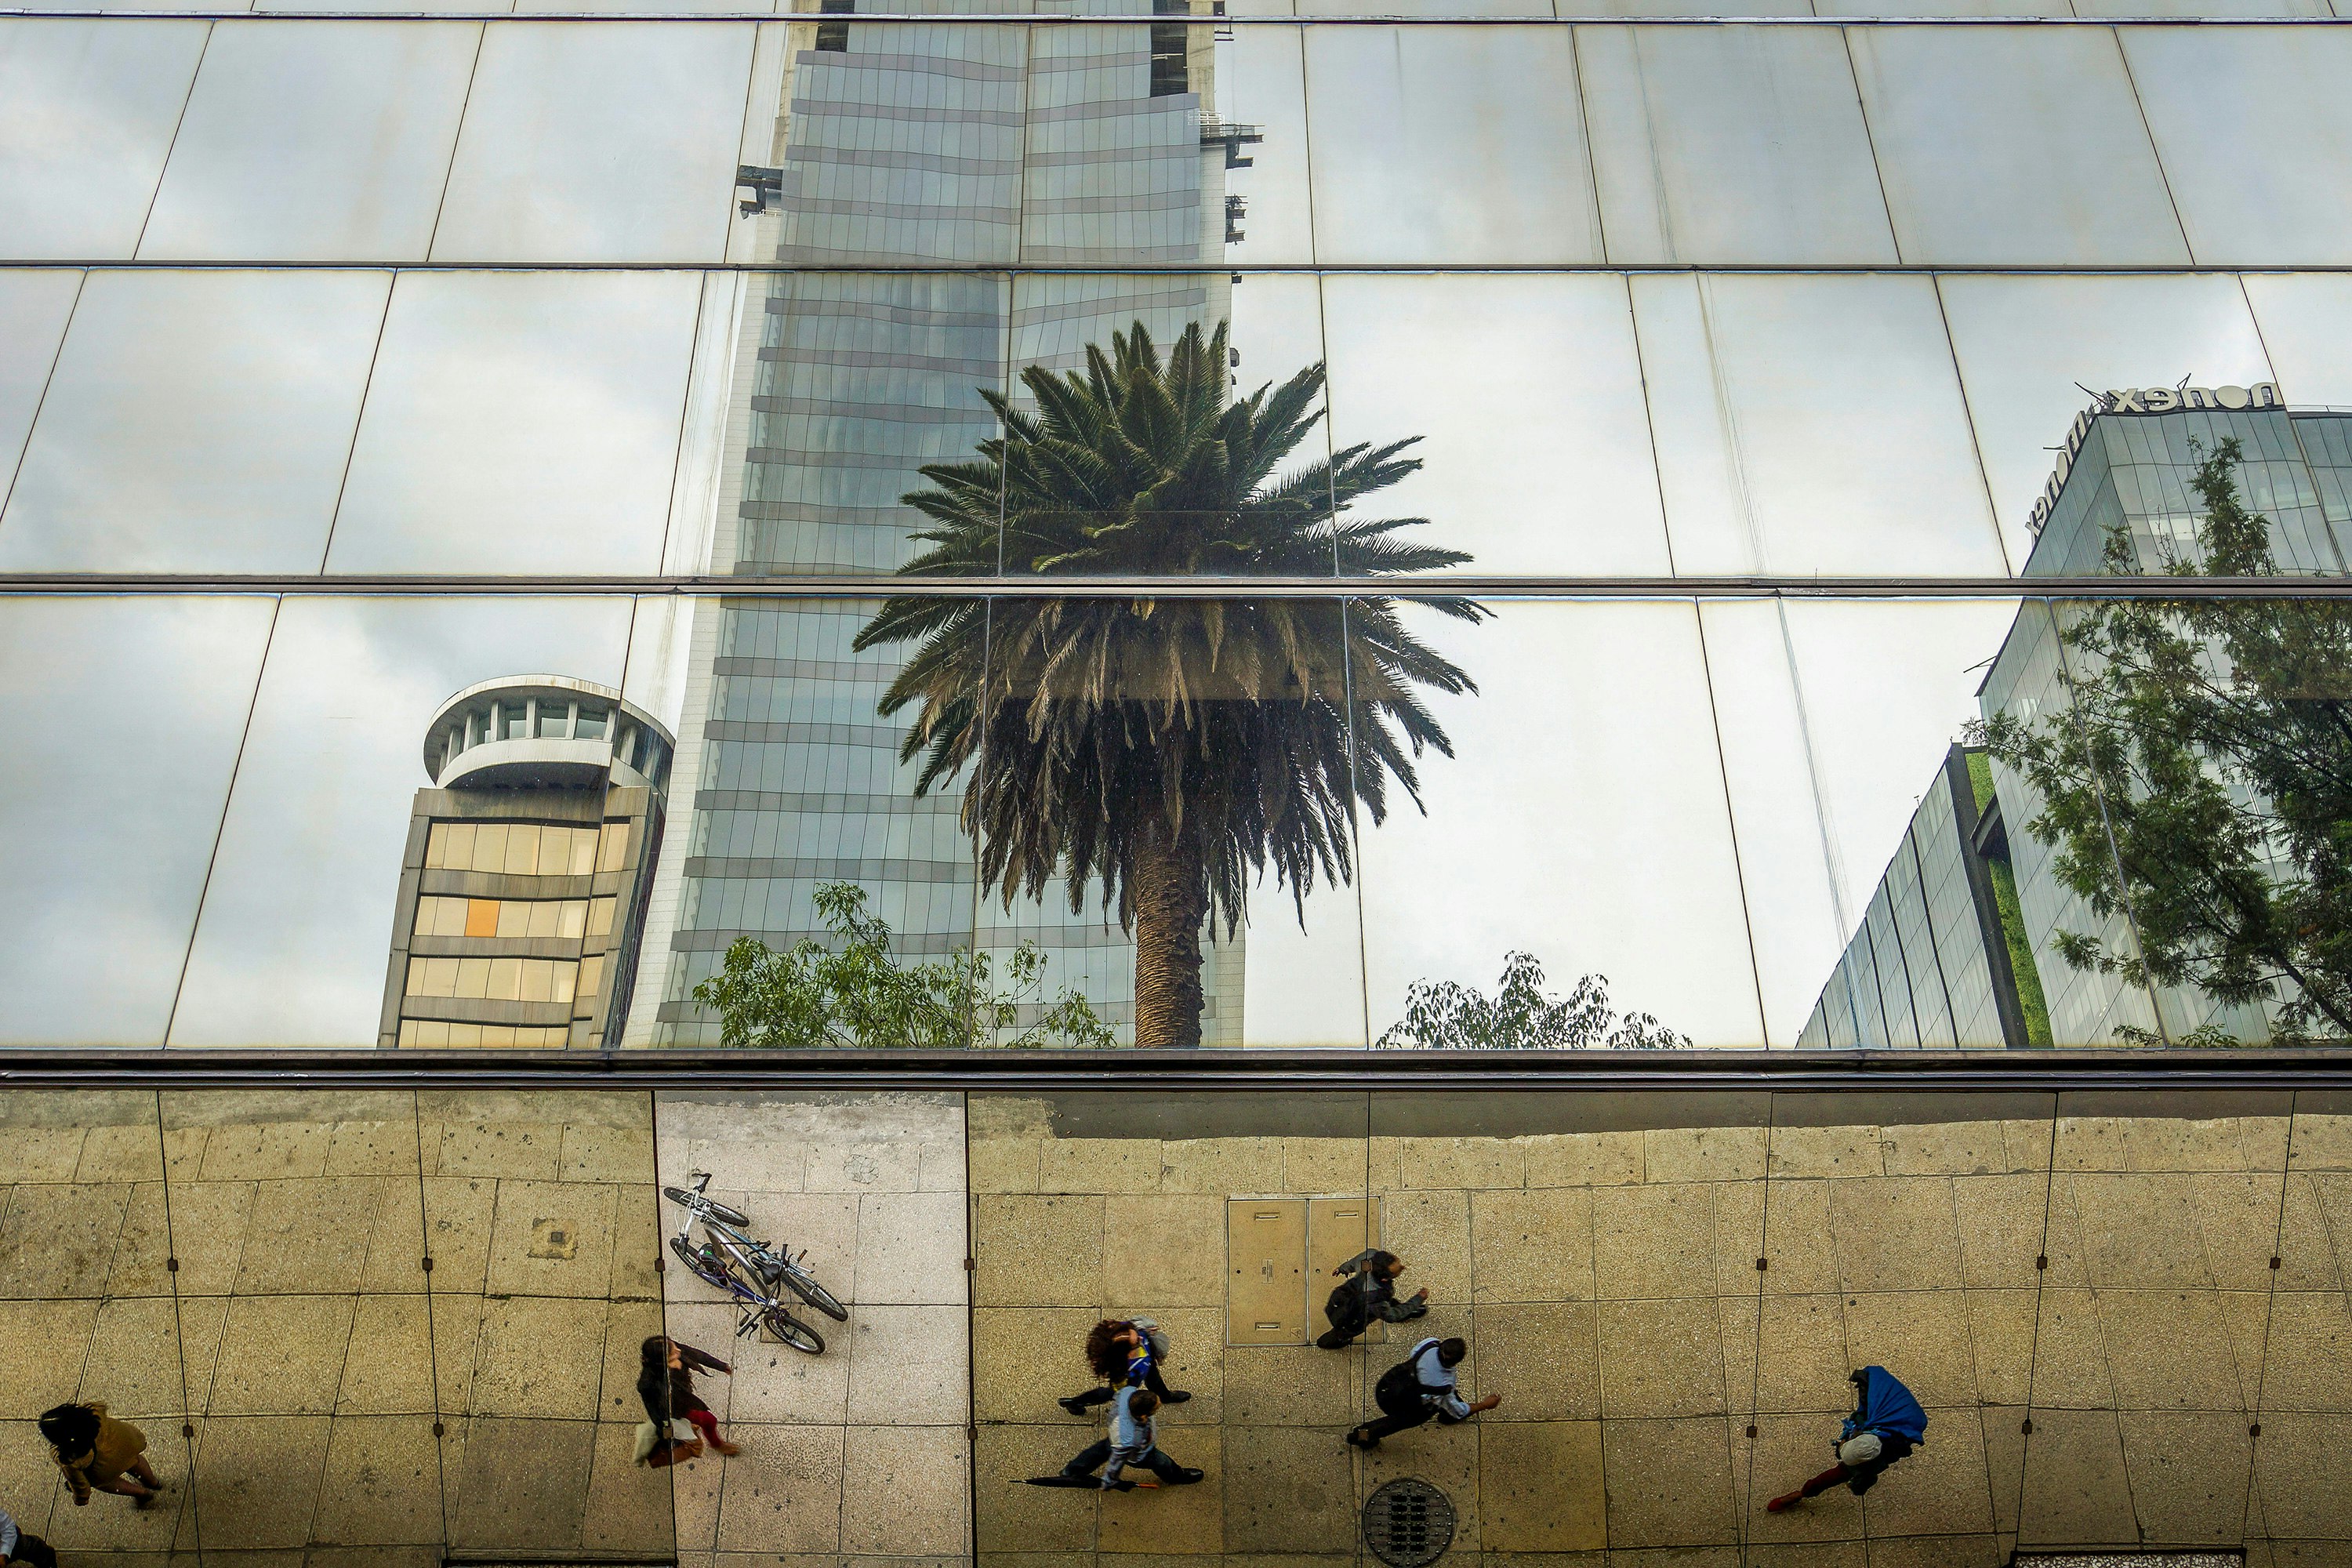 People on the sidewalk next to mirrored buildings in downtown Mexico City.